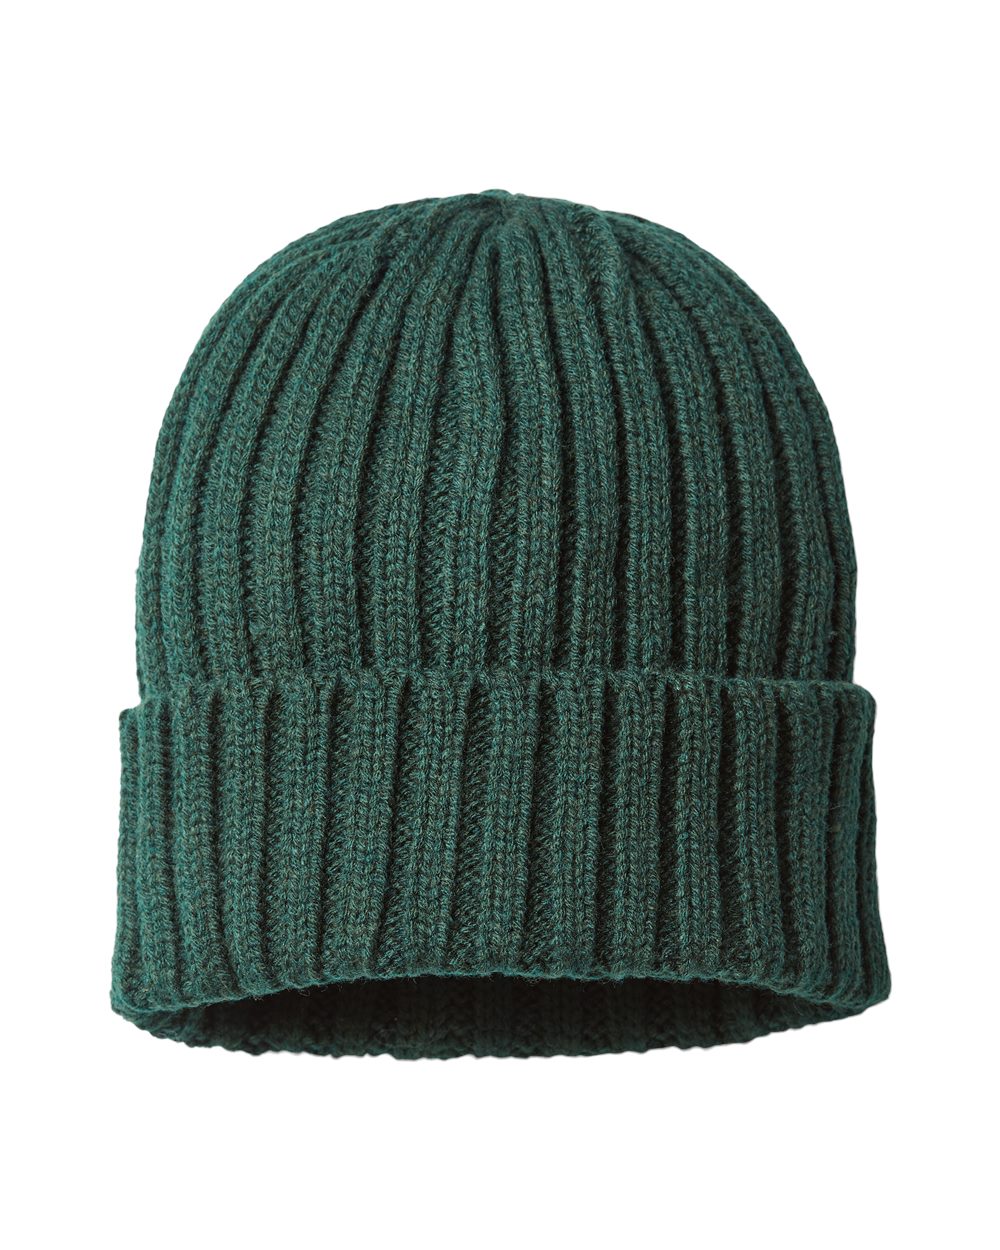 Atlantis Headwear SHORE - Sustainable Cable Knit Cuffed Beanie